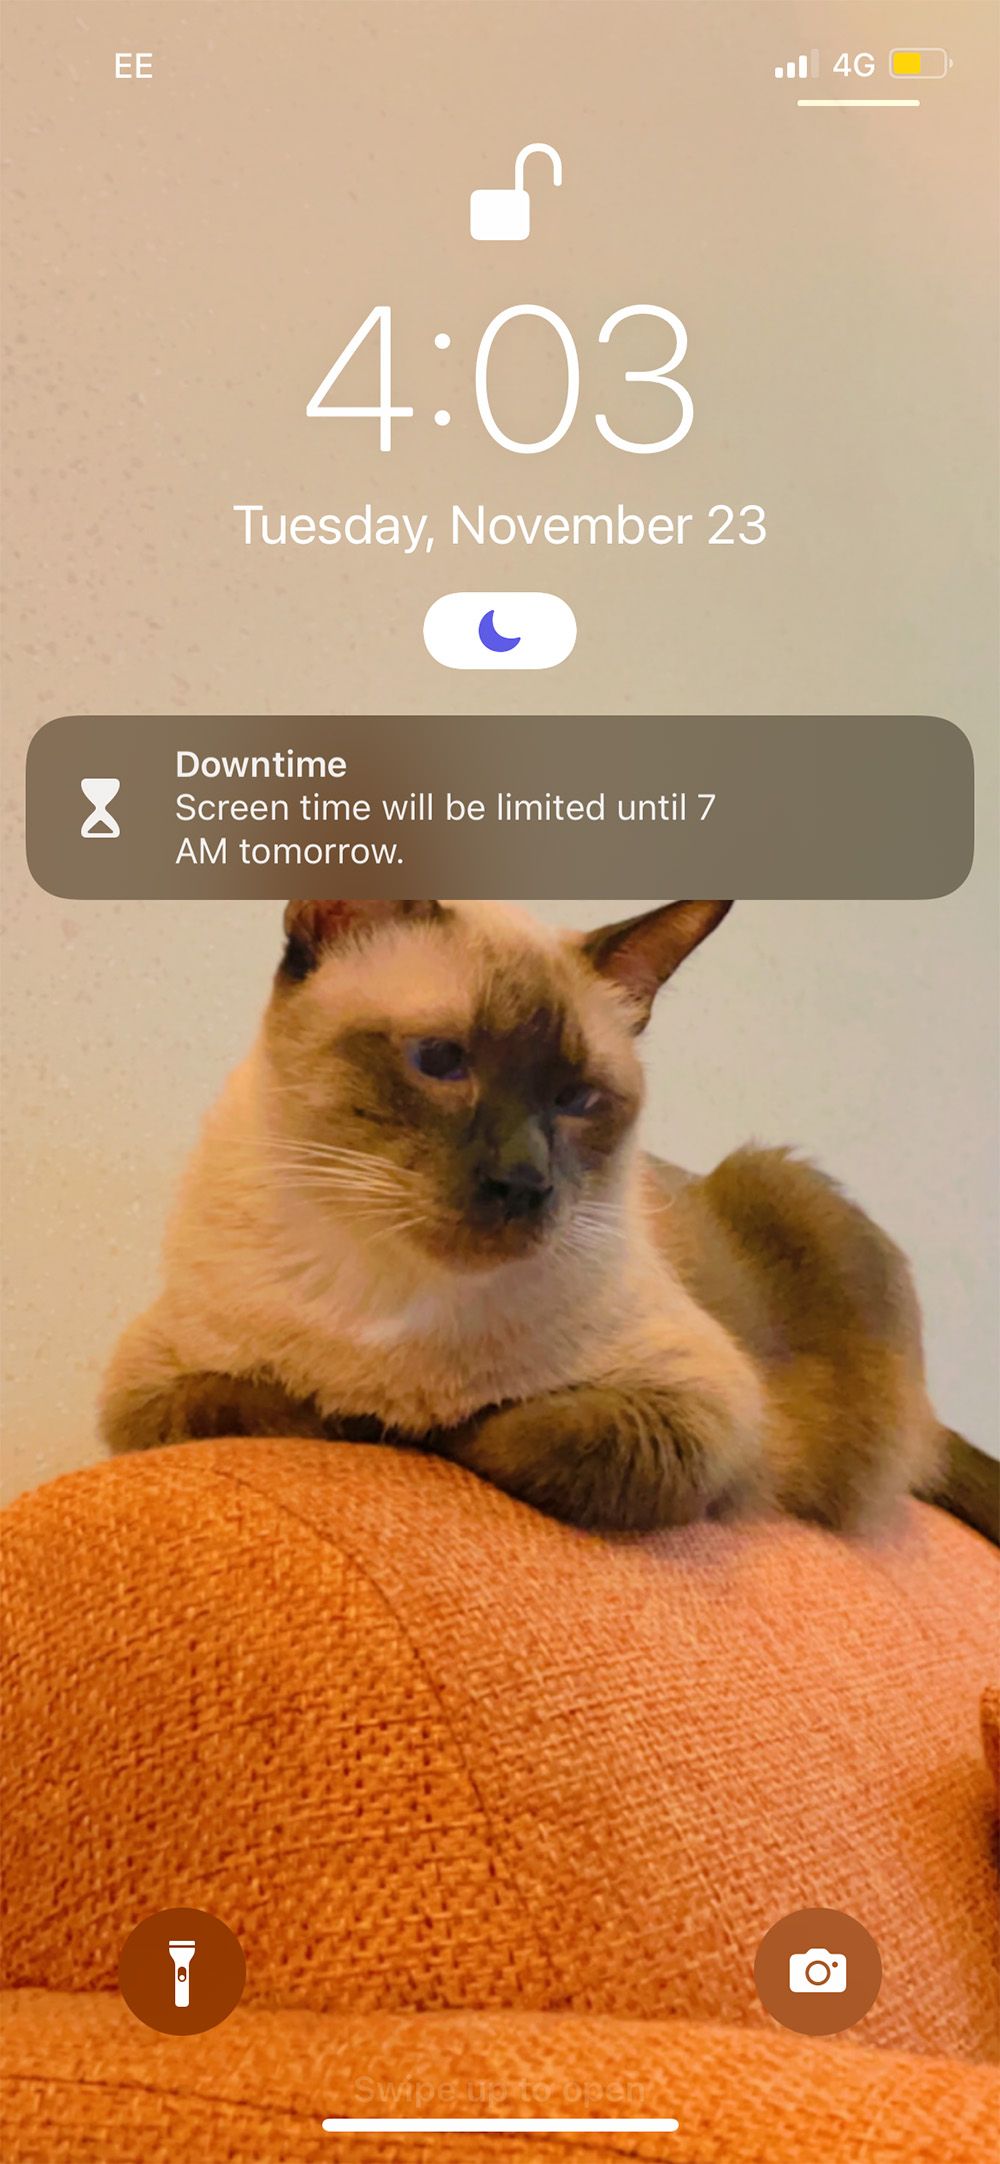 Downtime feature on iPhone Lock Screen